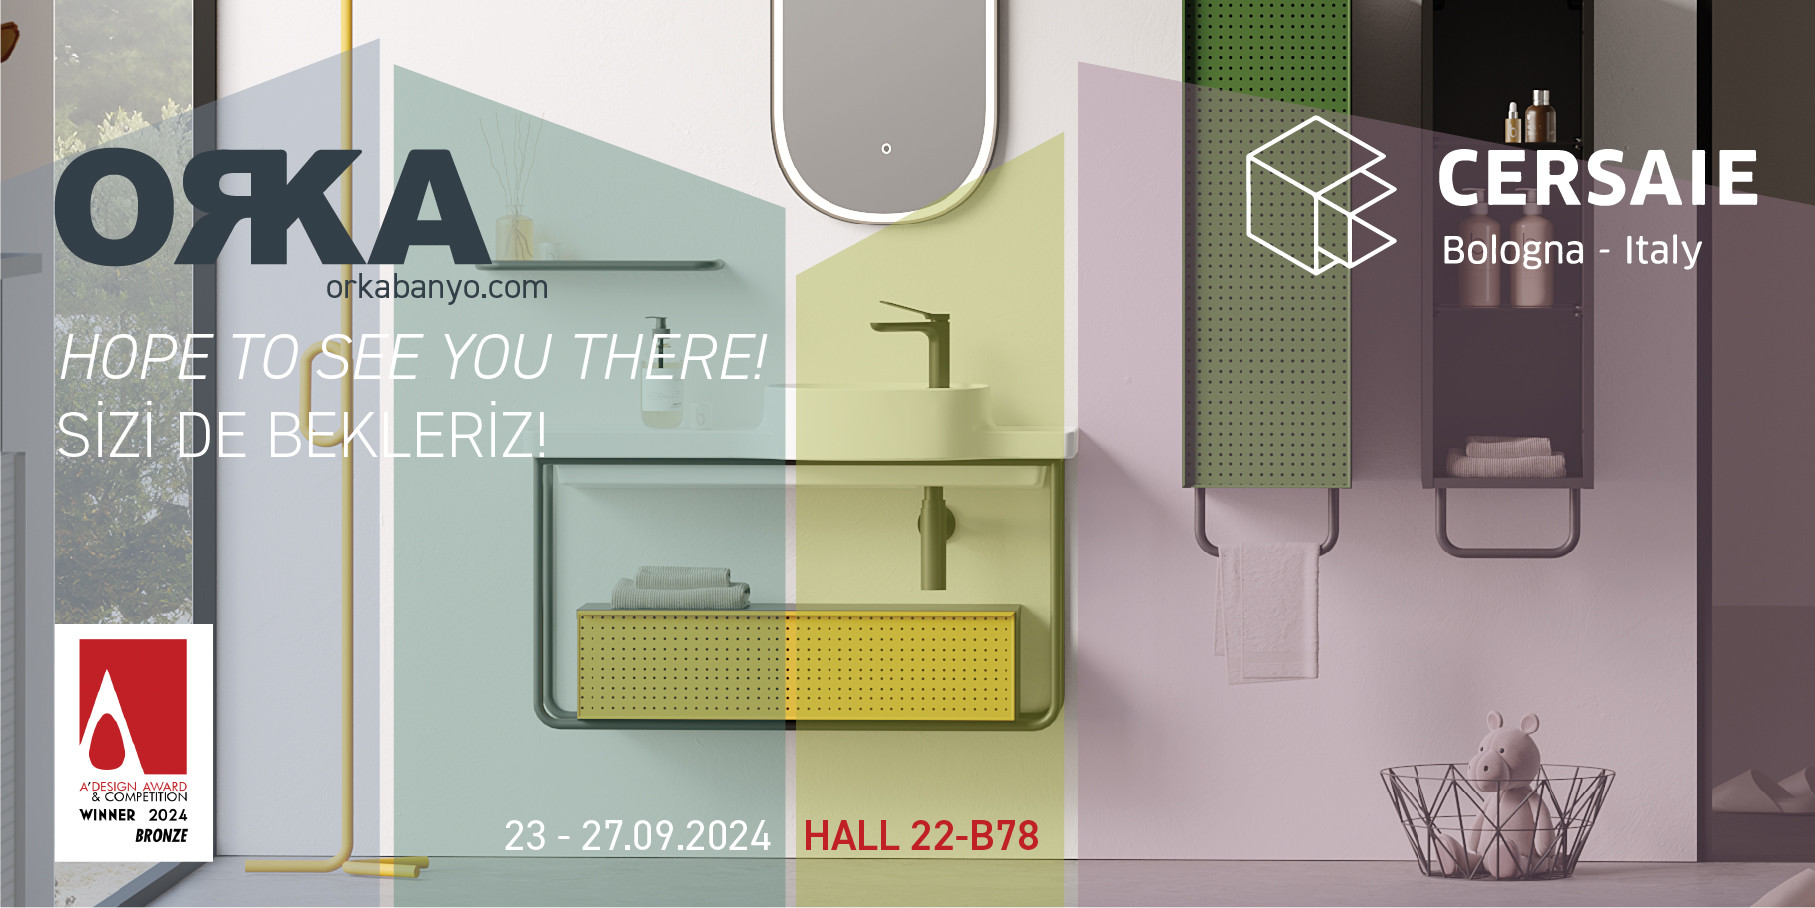 Discover the Innovative Products of ORKA and nob. at Cersaie 2024!